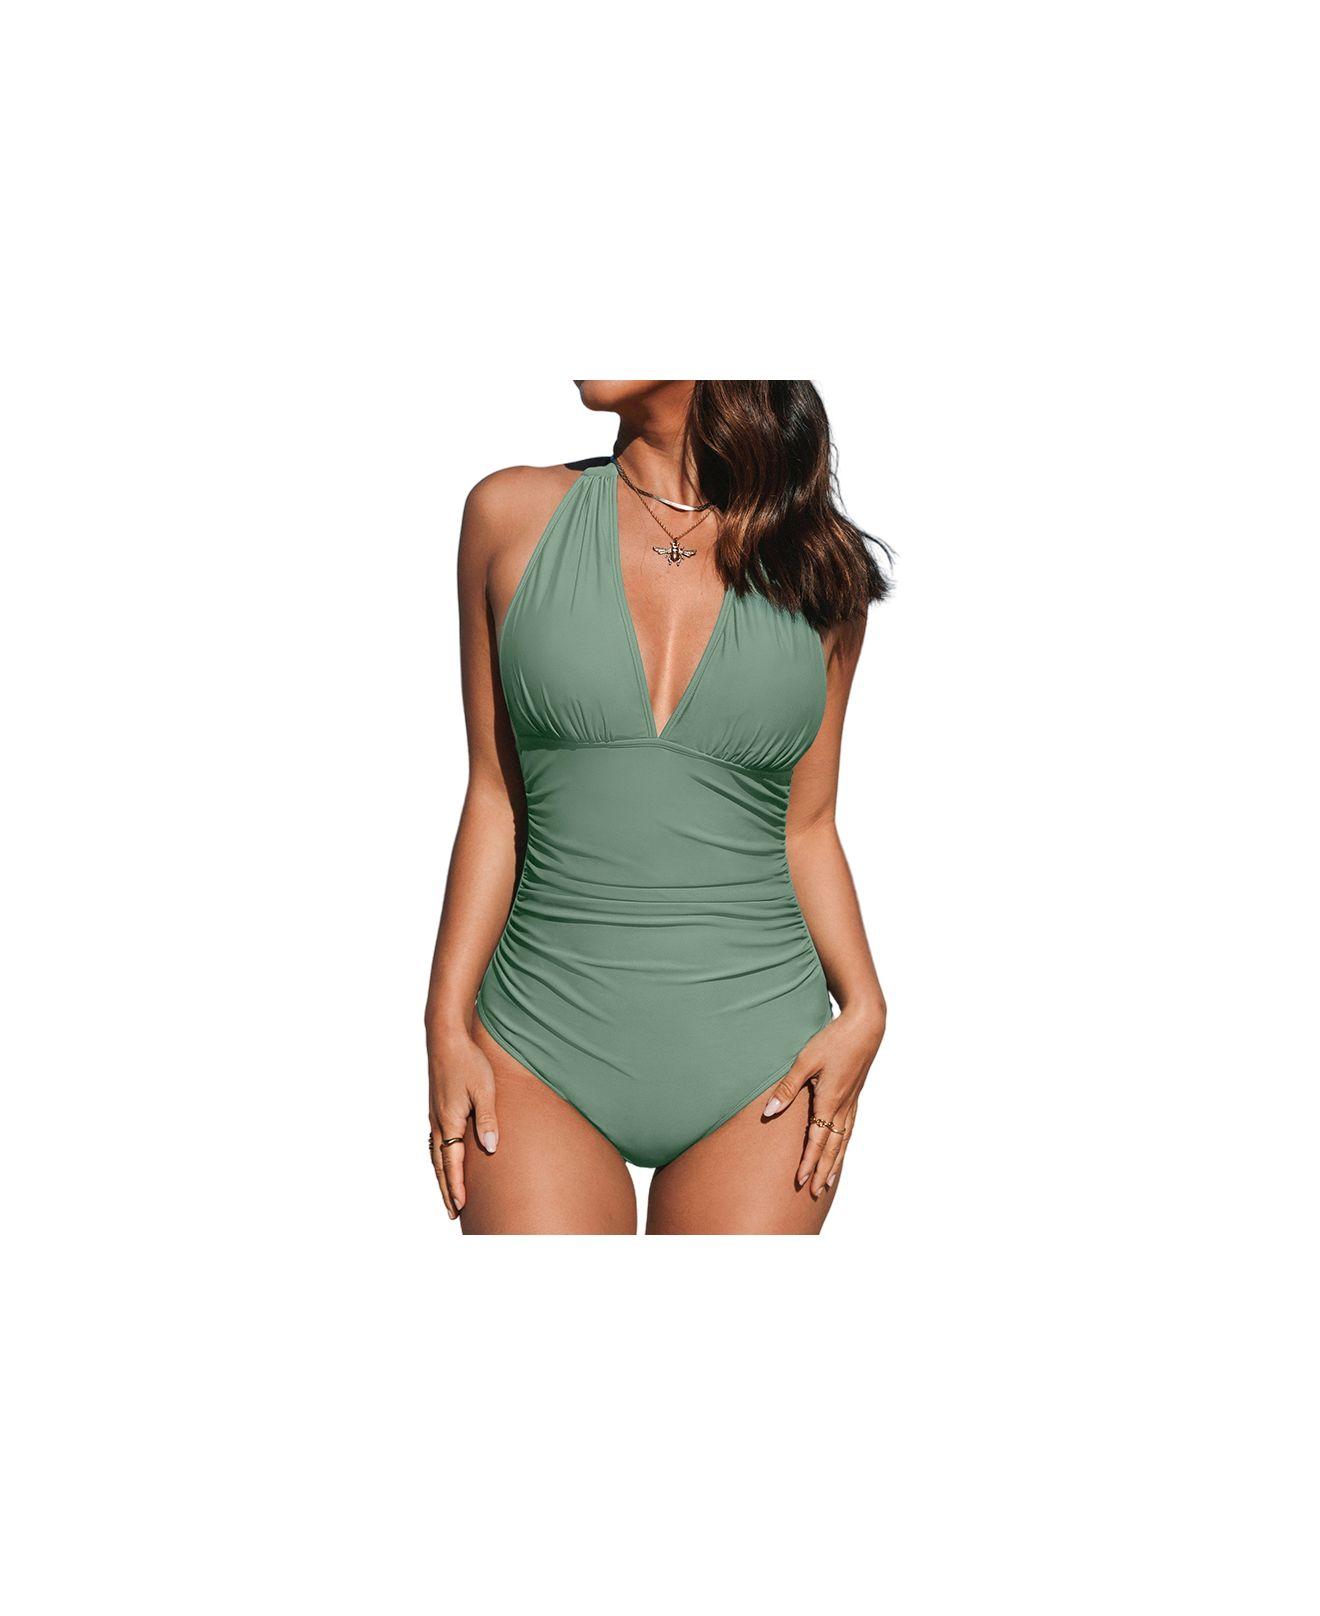 https://cdna.lystit.com/photos/macys/e8e37abe/cupshe-Green-V-Neck-One-Piece-Swimsuit-Halter-Backless-Ruched-Tummy-Control-Bathing-Suit.jpeg